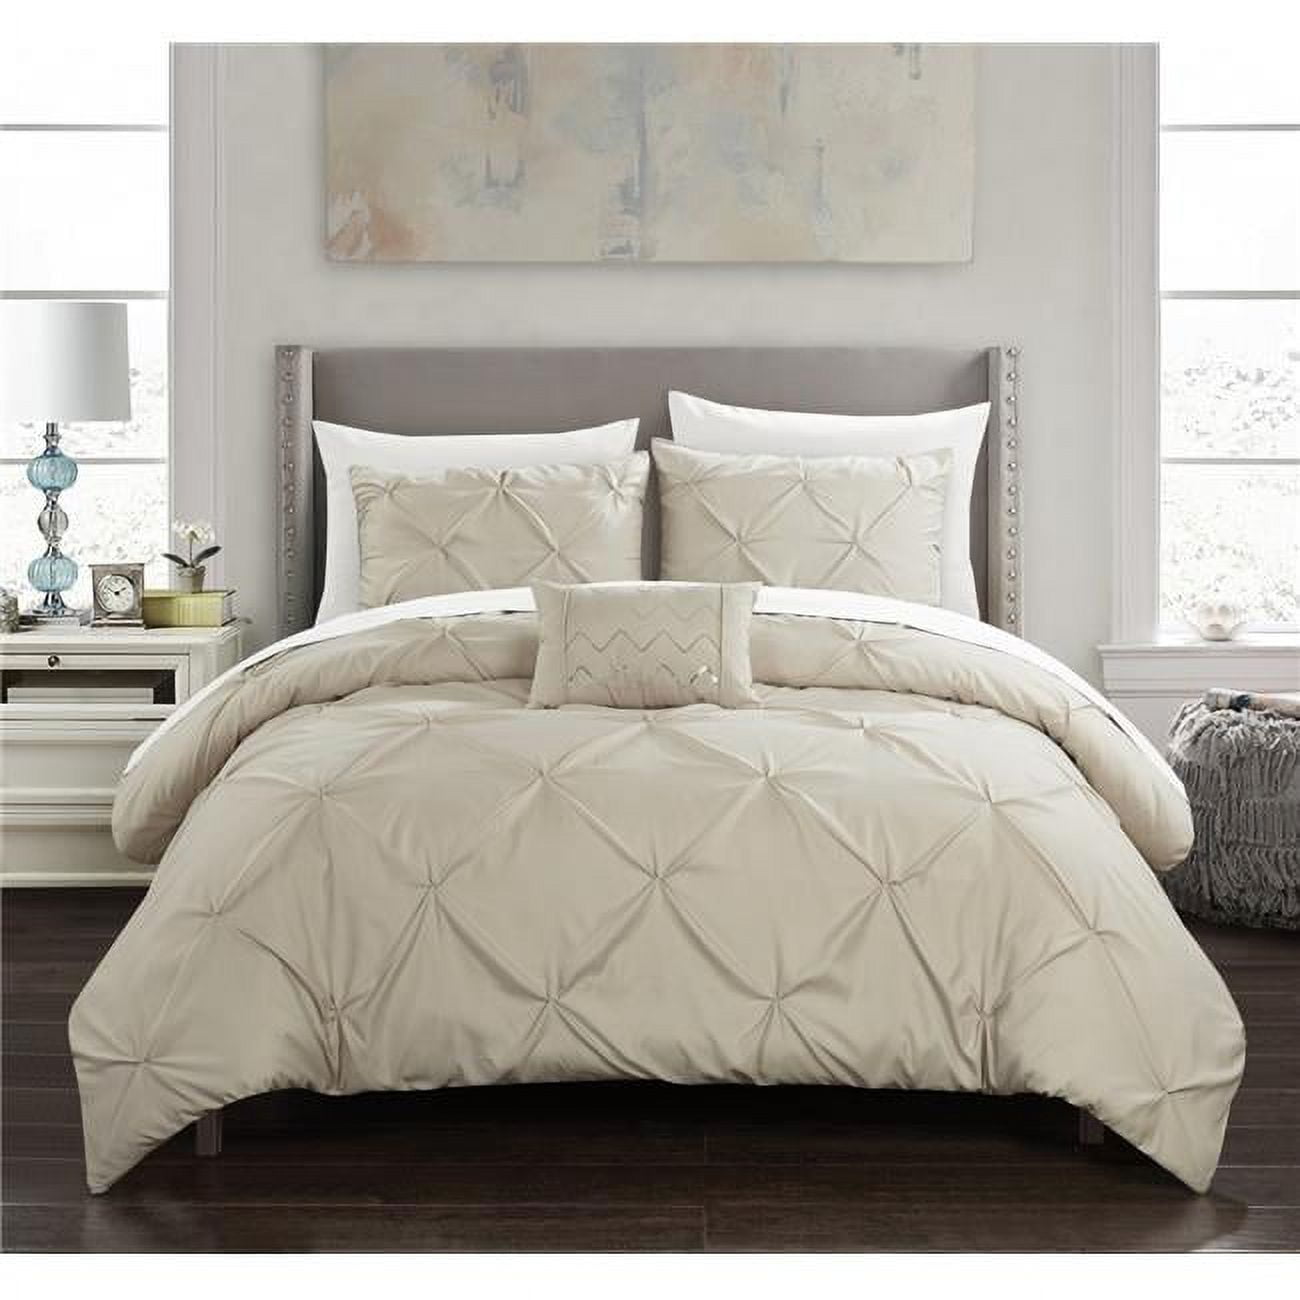 Bds10353-us King Size Yvonne Duvet Cover Set, Taupe - 4 Piece